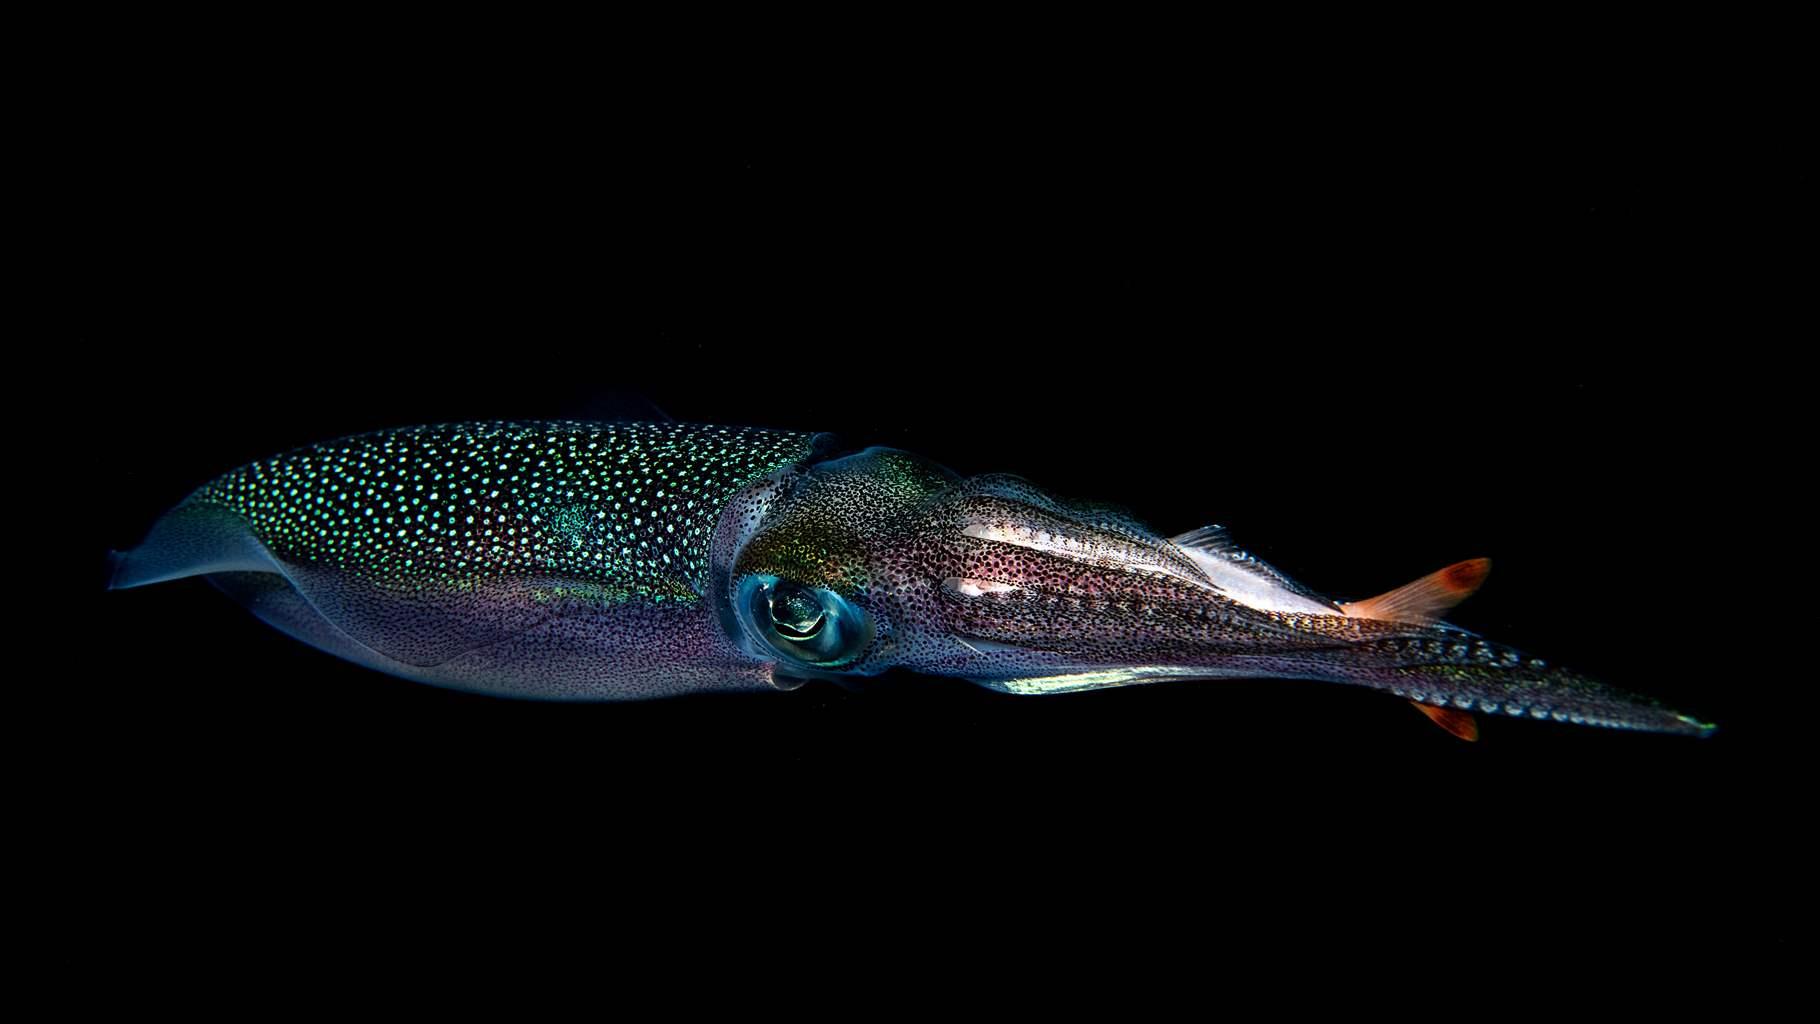  The water is ink dark behind a sea squid that has an opalescent green pouch and a navy blue underbelly that surround an enormous eye. Credit Tracey Jennings/Ocean Image Bank